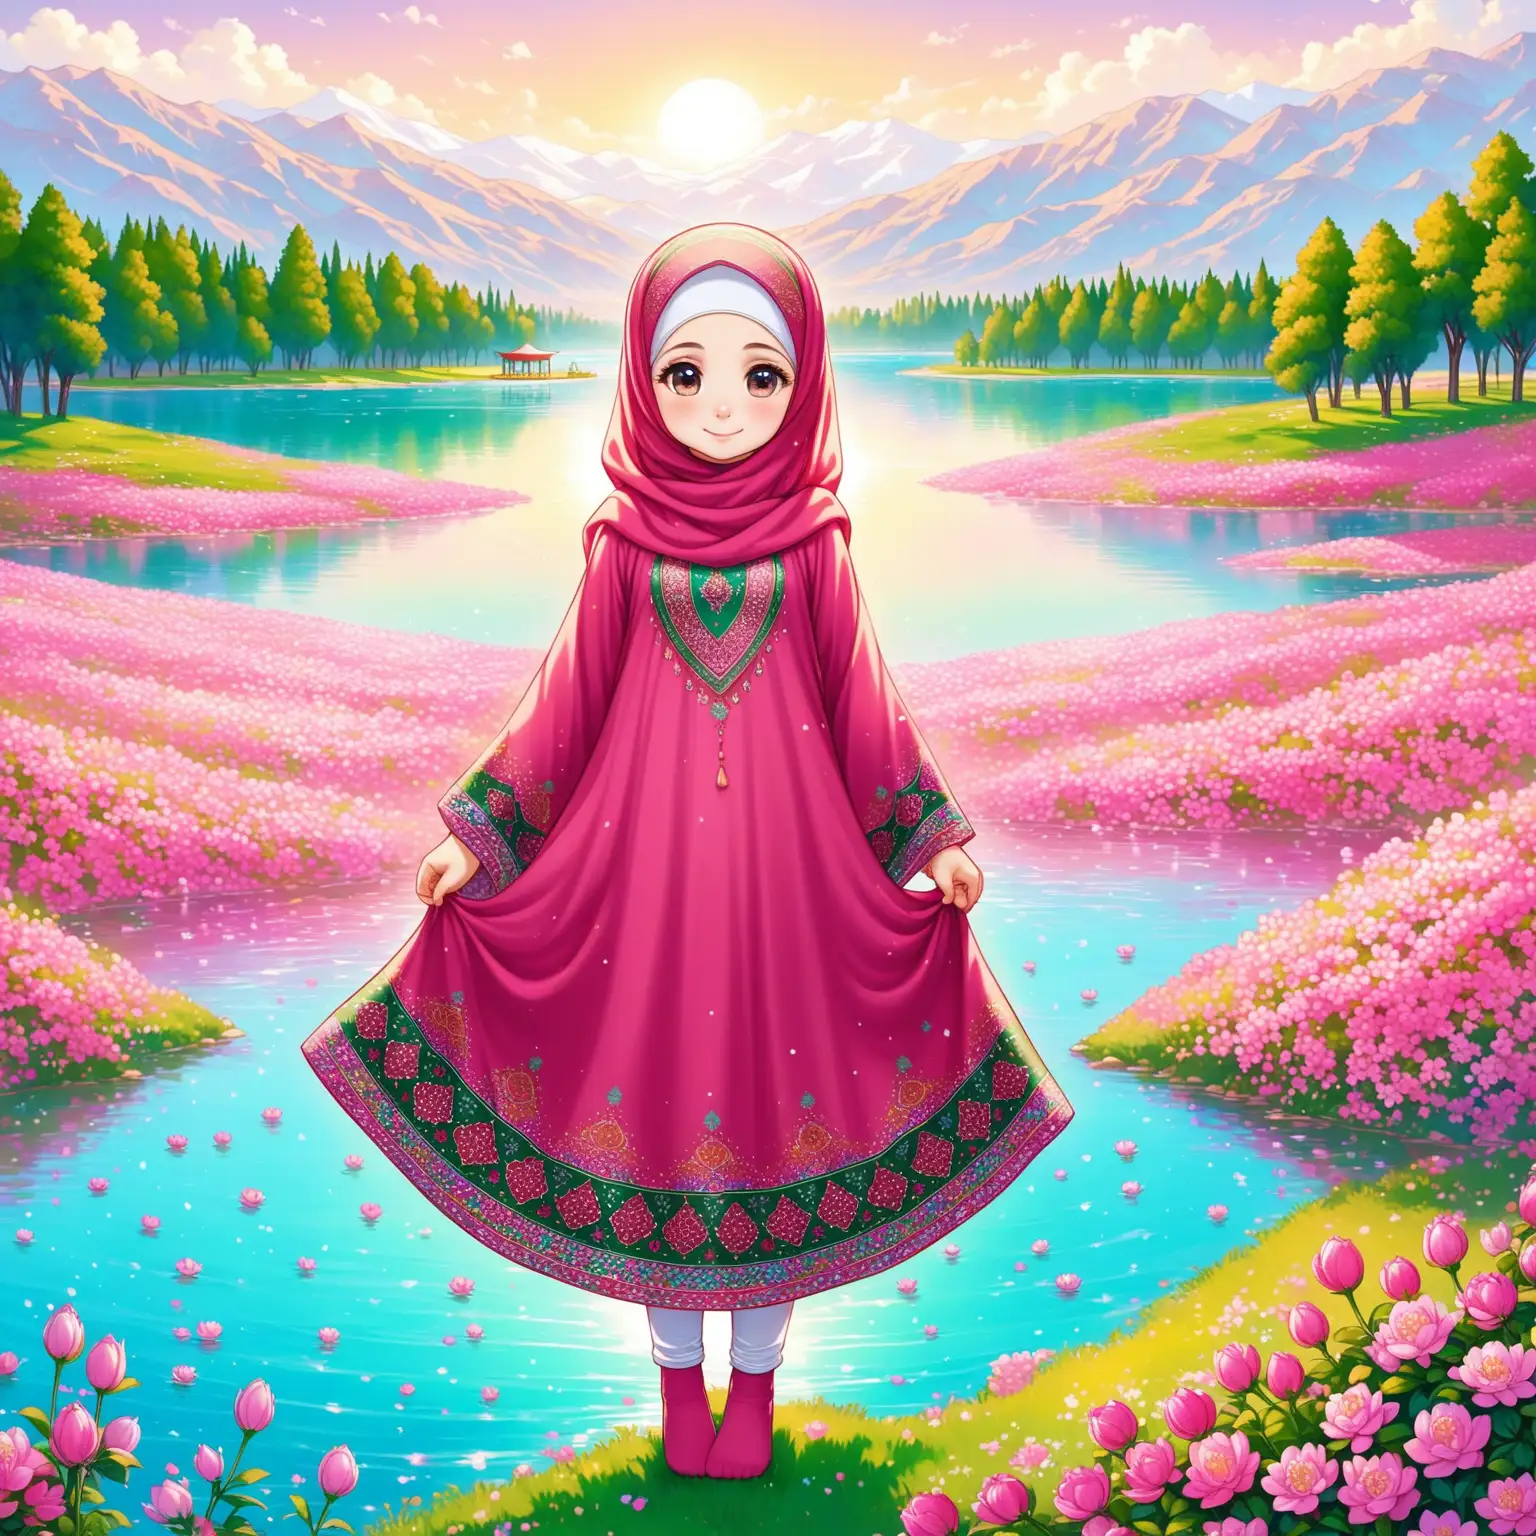 Persian little girl(full height, Muslim, with emphasis no hair out of veil(Hijab), small eyes, bigger nose, white skin, cute, smiling, wearing socks, clothes full of Persian designs).
Atmosphere full of many pink flowers, lake, spring, big flag of Iran.